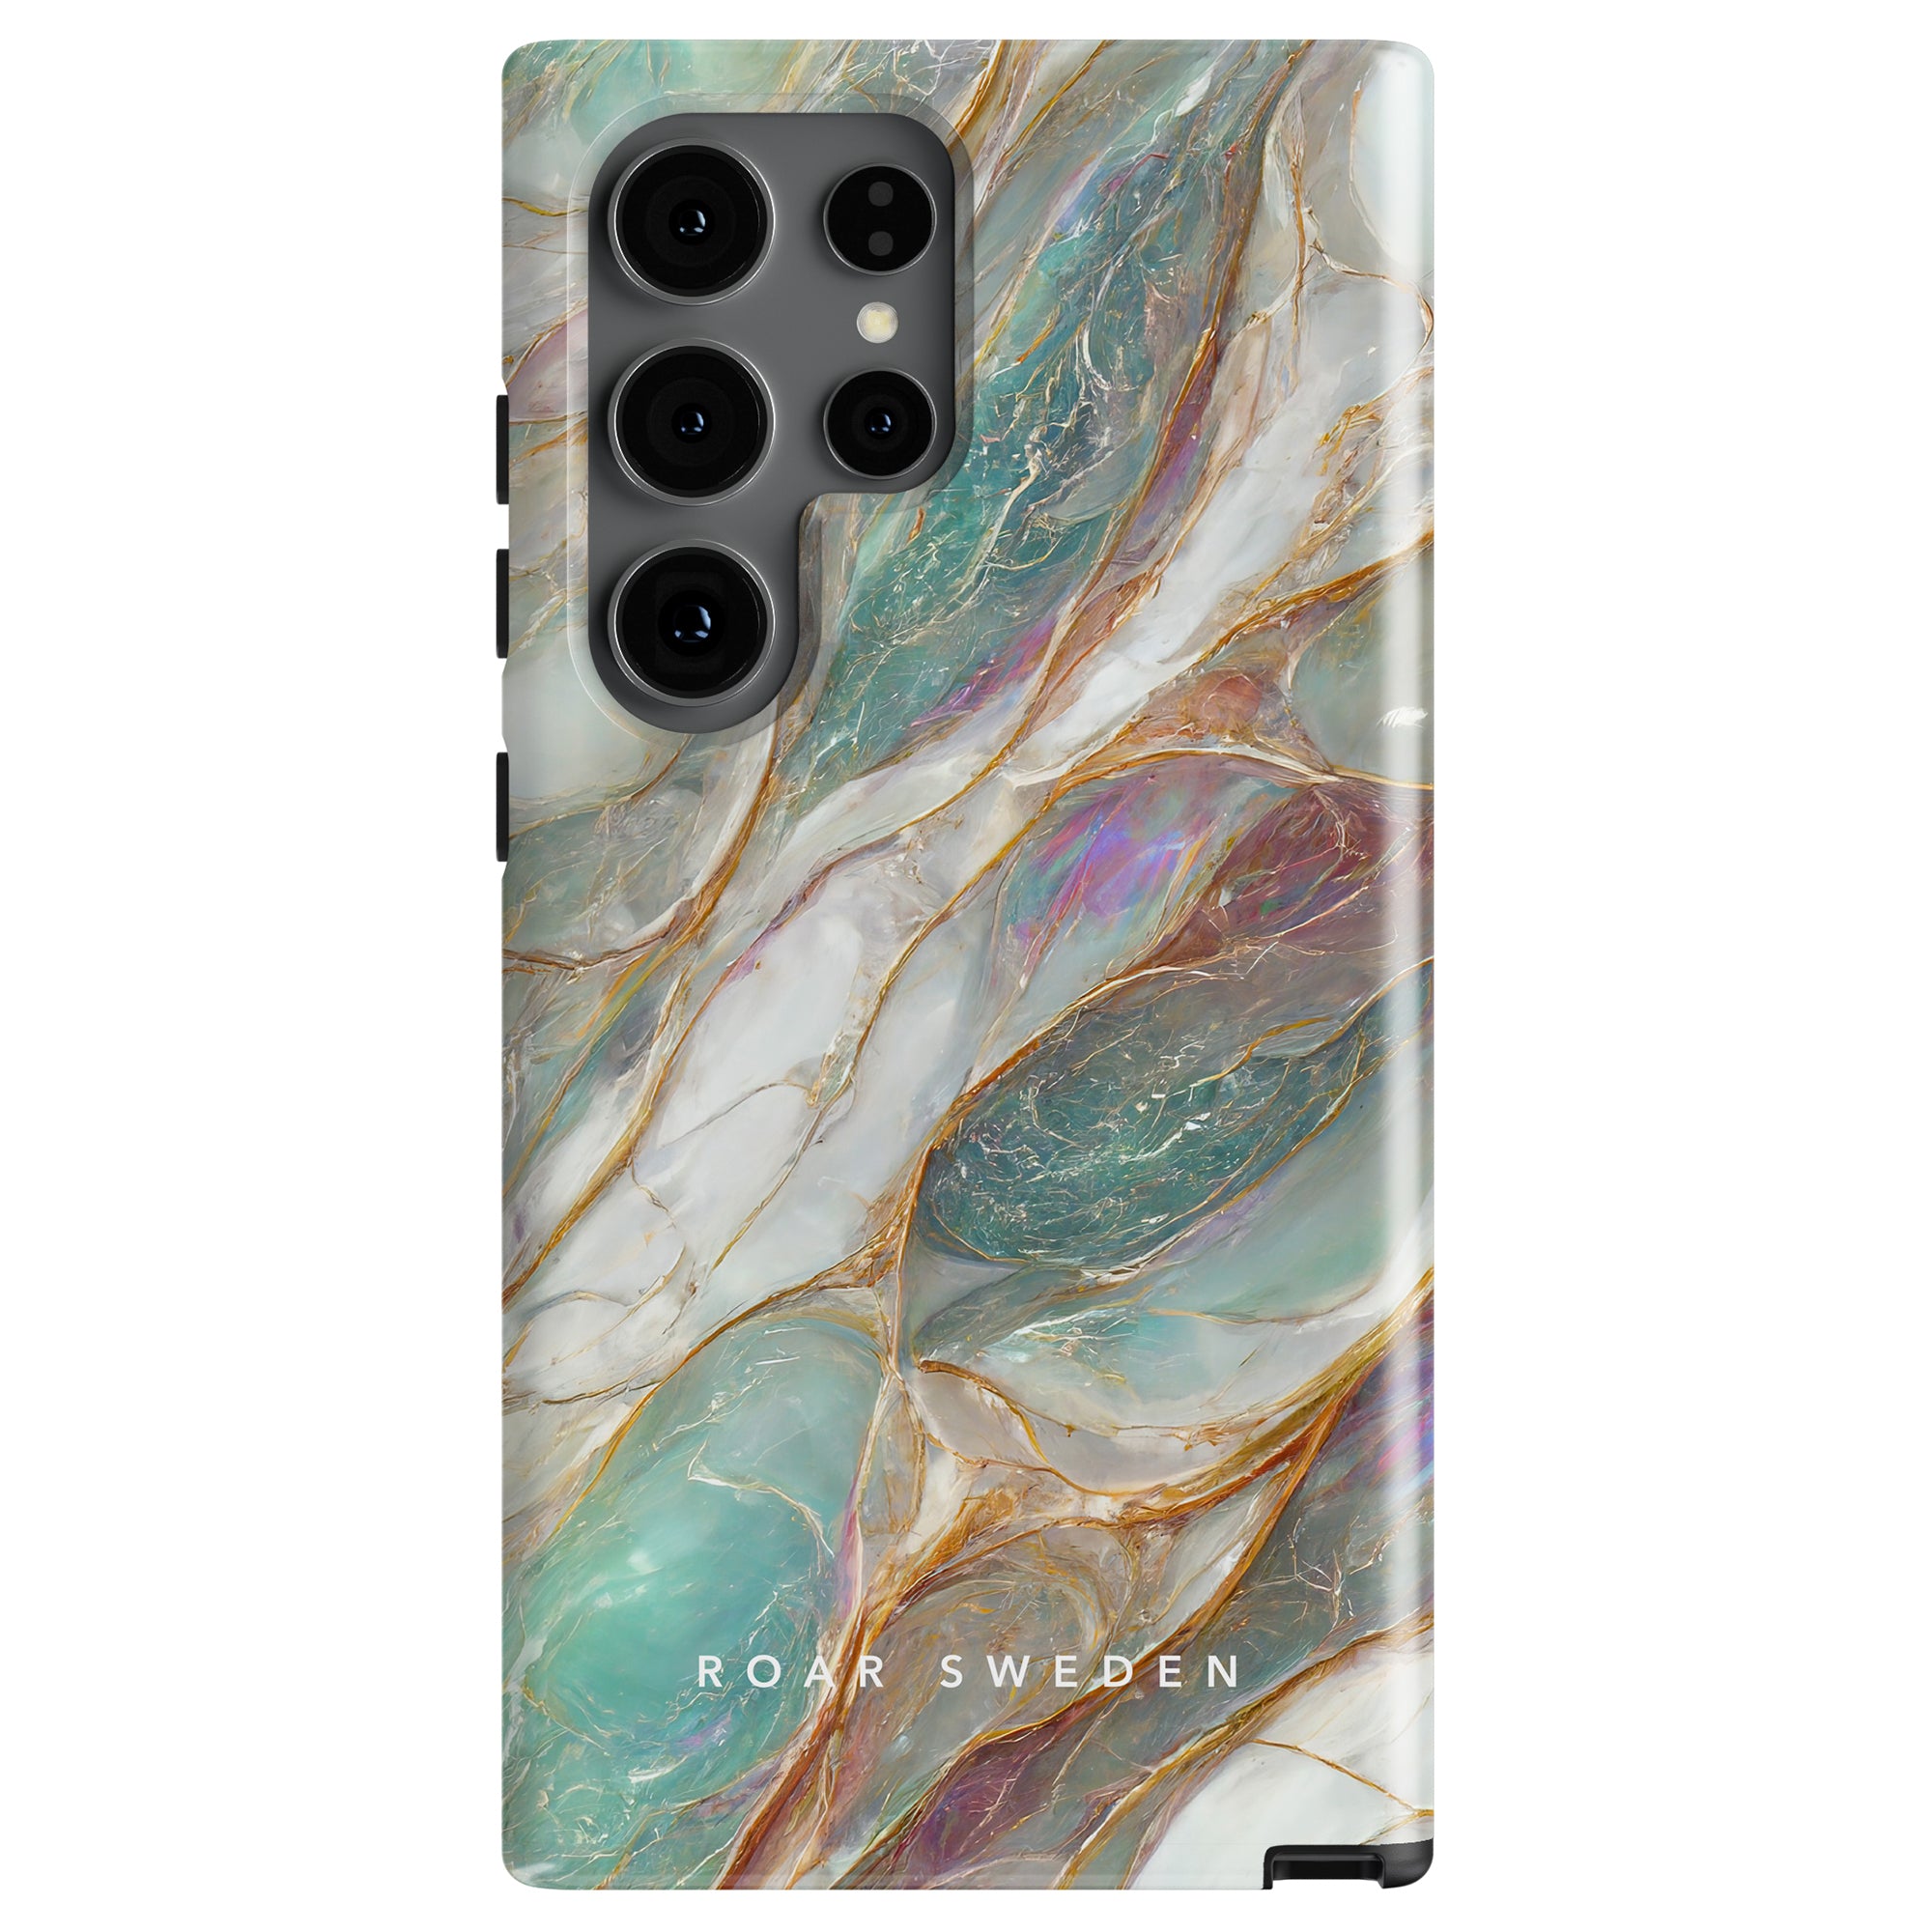 Mother of Pearl - Tough Case with a marble design in shades of white, green, and gold, labeled "roar sweden," featuring cutouts for camera lenses.